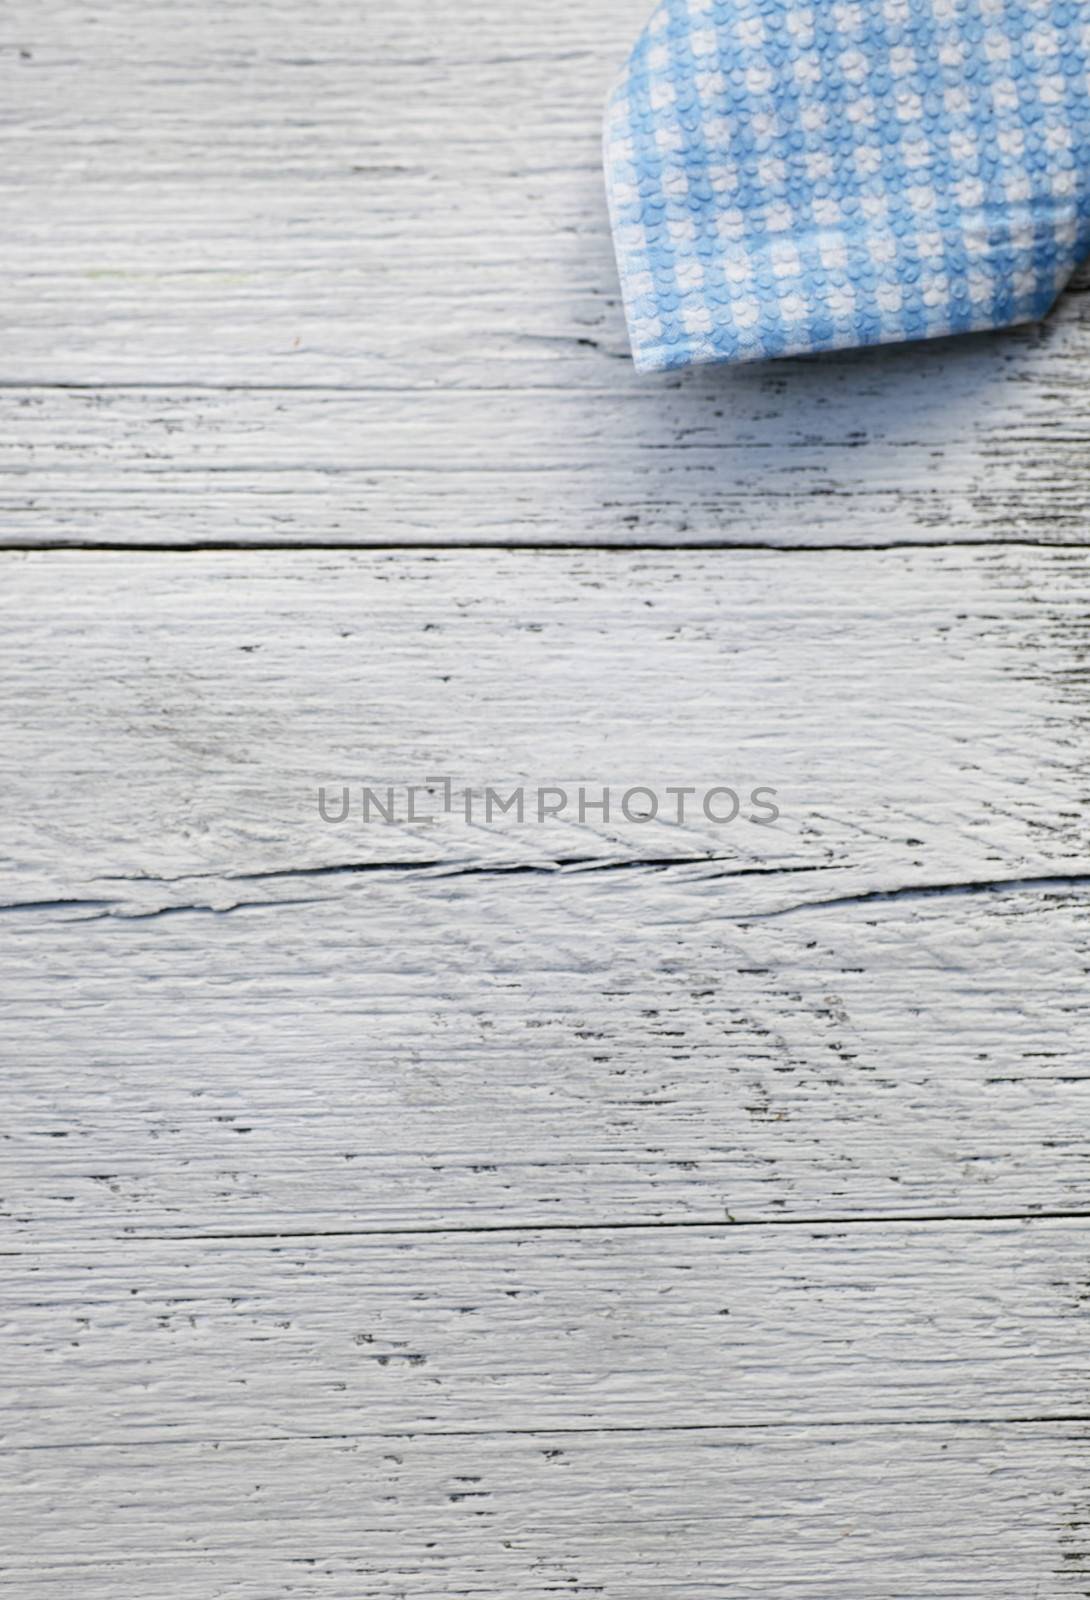 Rustic country background with a fresh blue and white checked napkin arranged in the corner of a white painted wooden background with cracked rough planks with copyspace